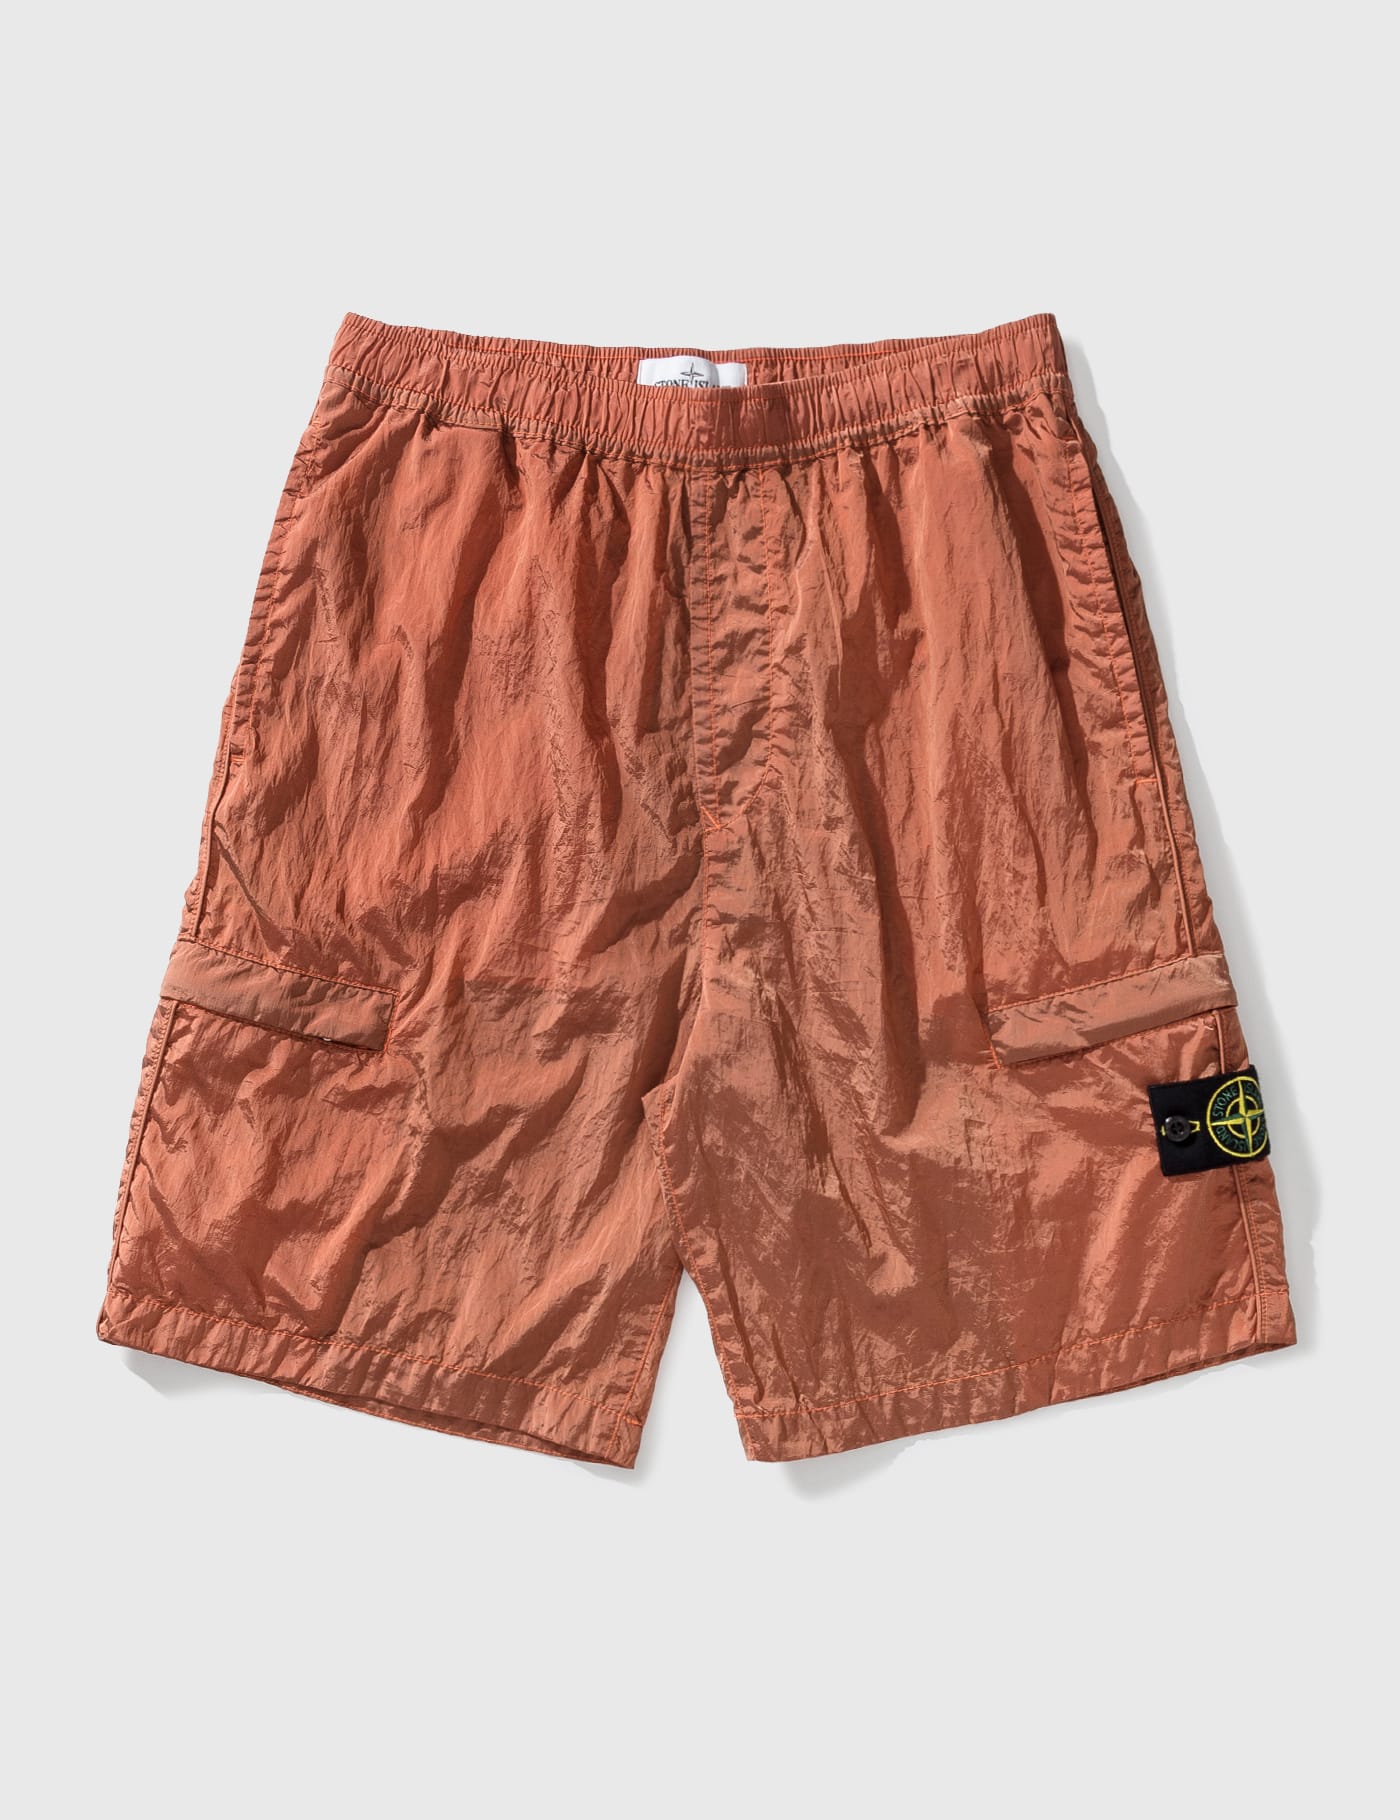 South2 West8 - Trail Shorts | HBX - Globally Curated Fashion and 